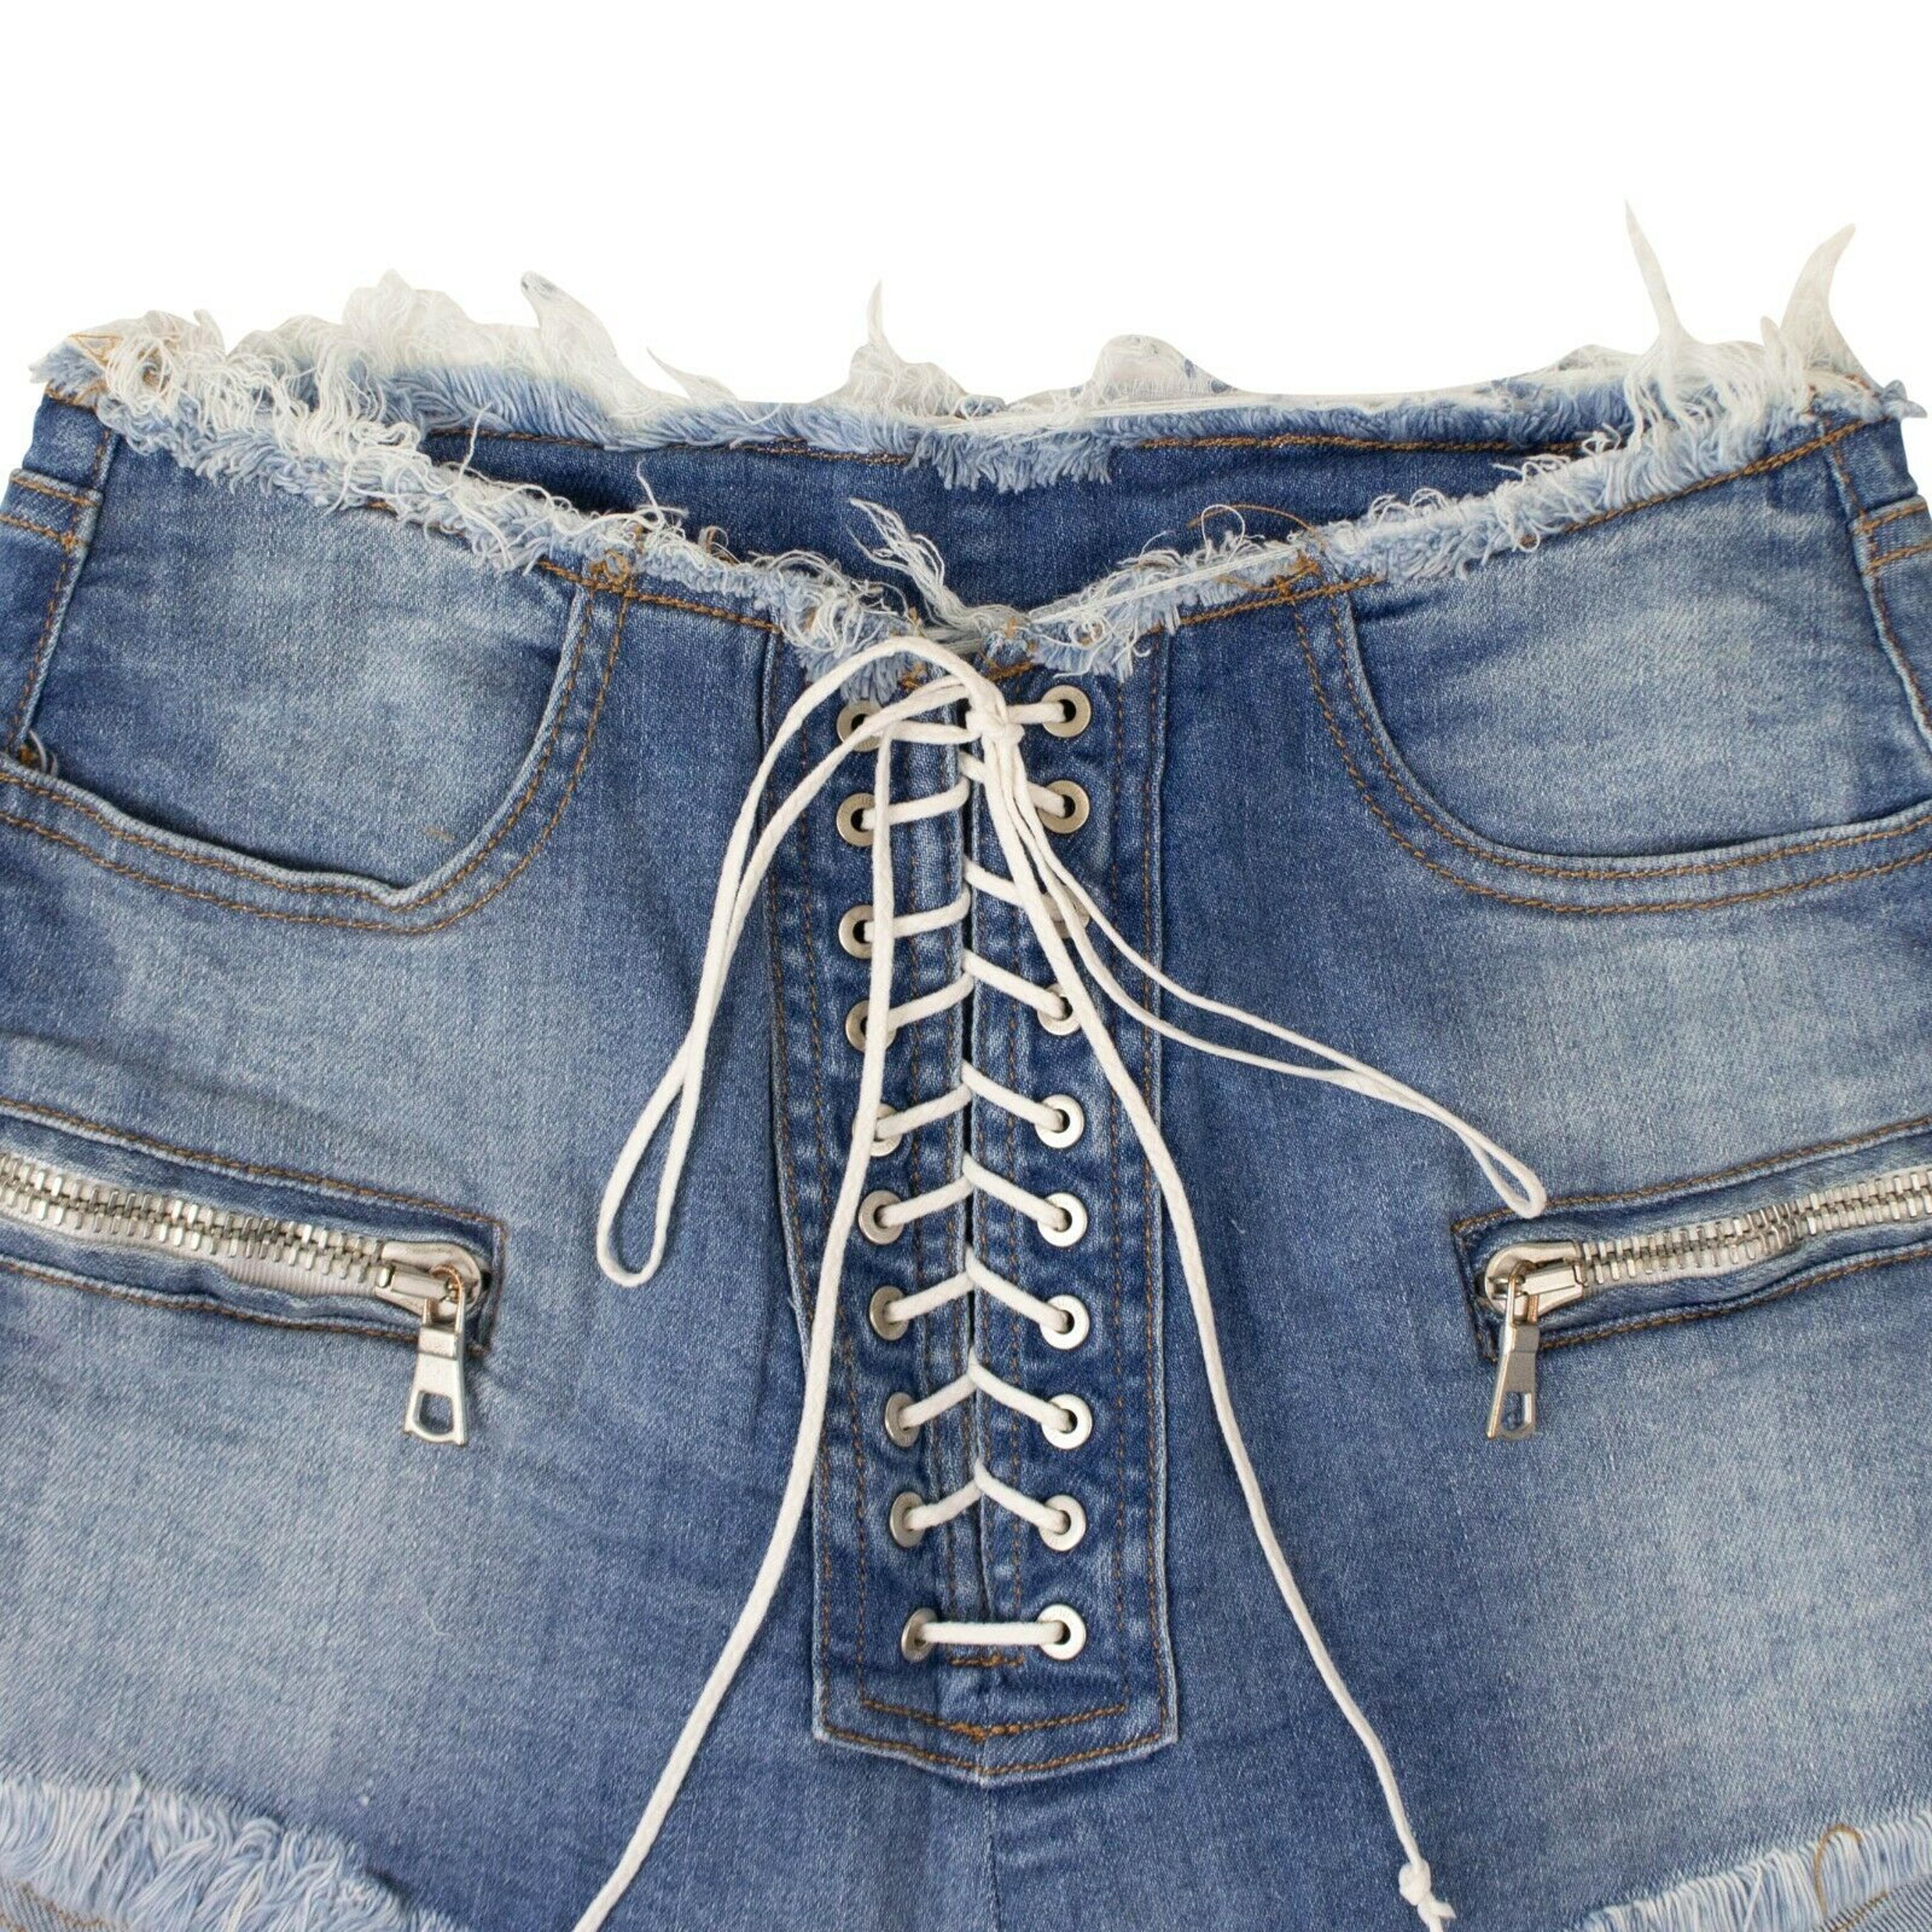 Alternate View 1 of Denim Lace-Up Shorts